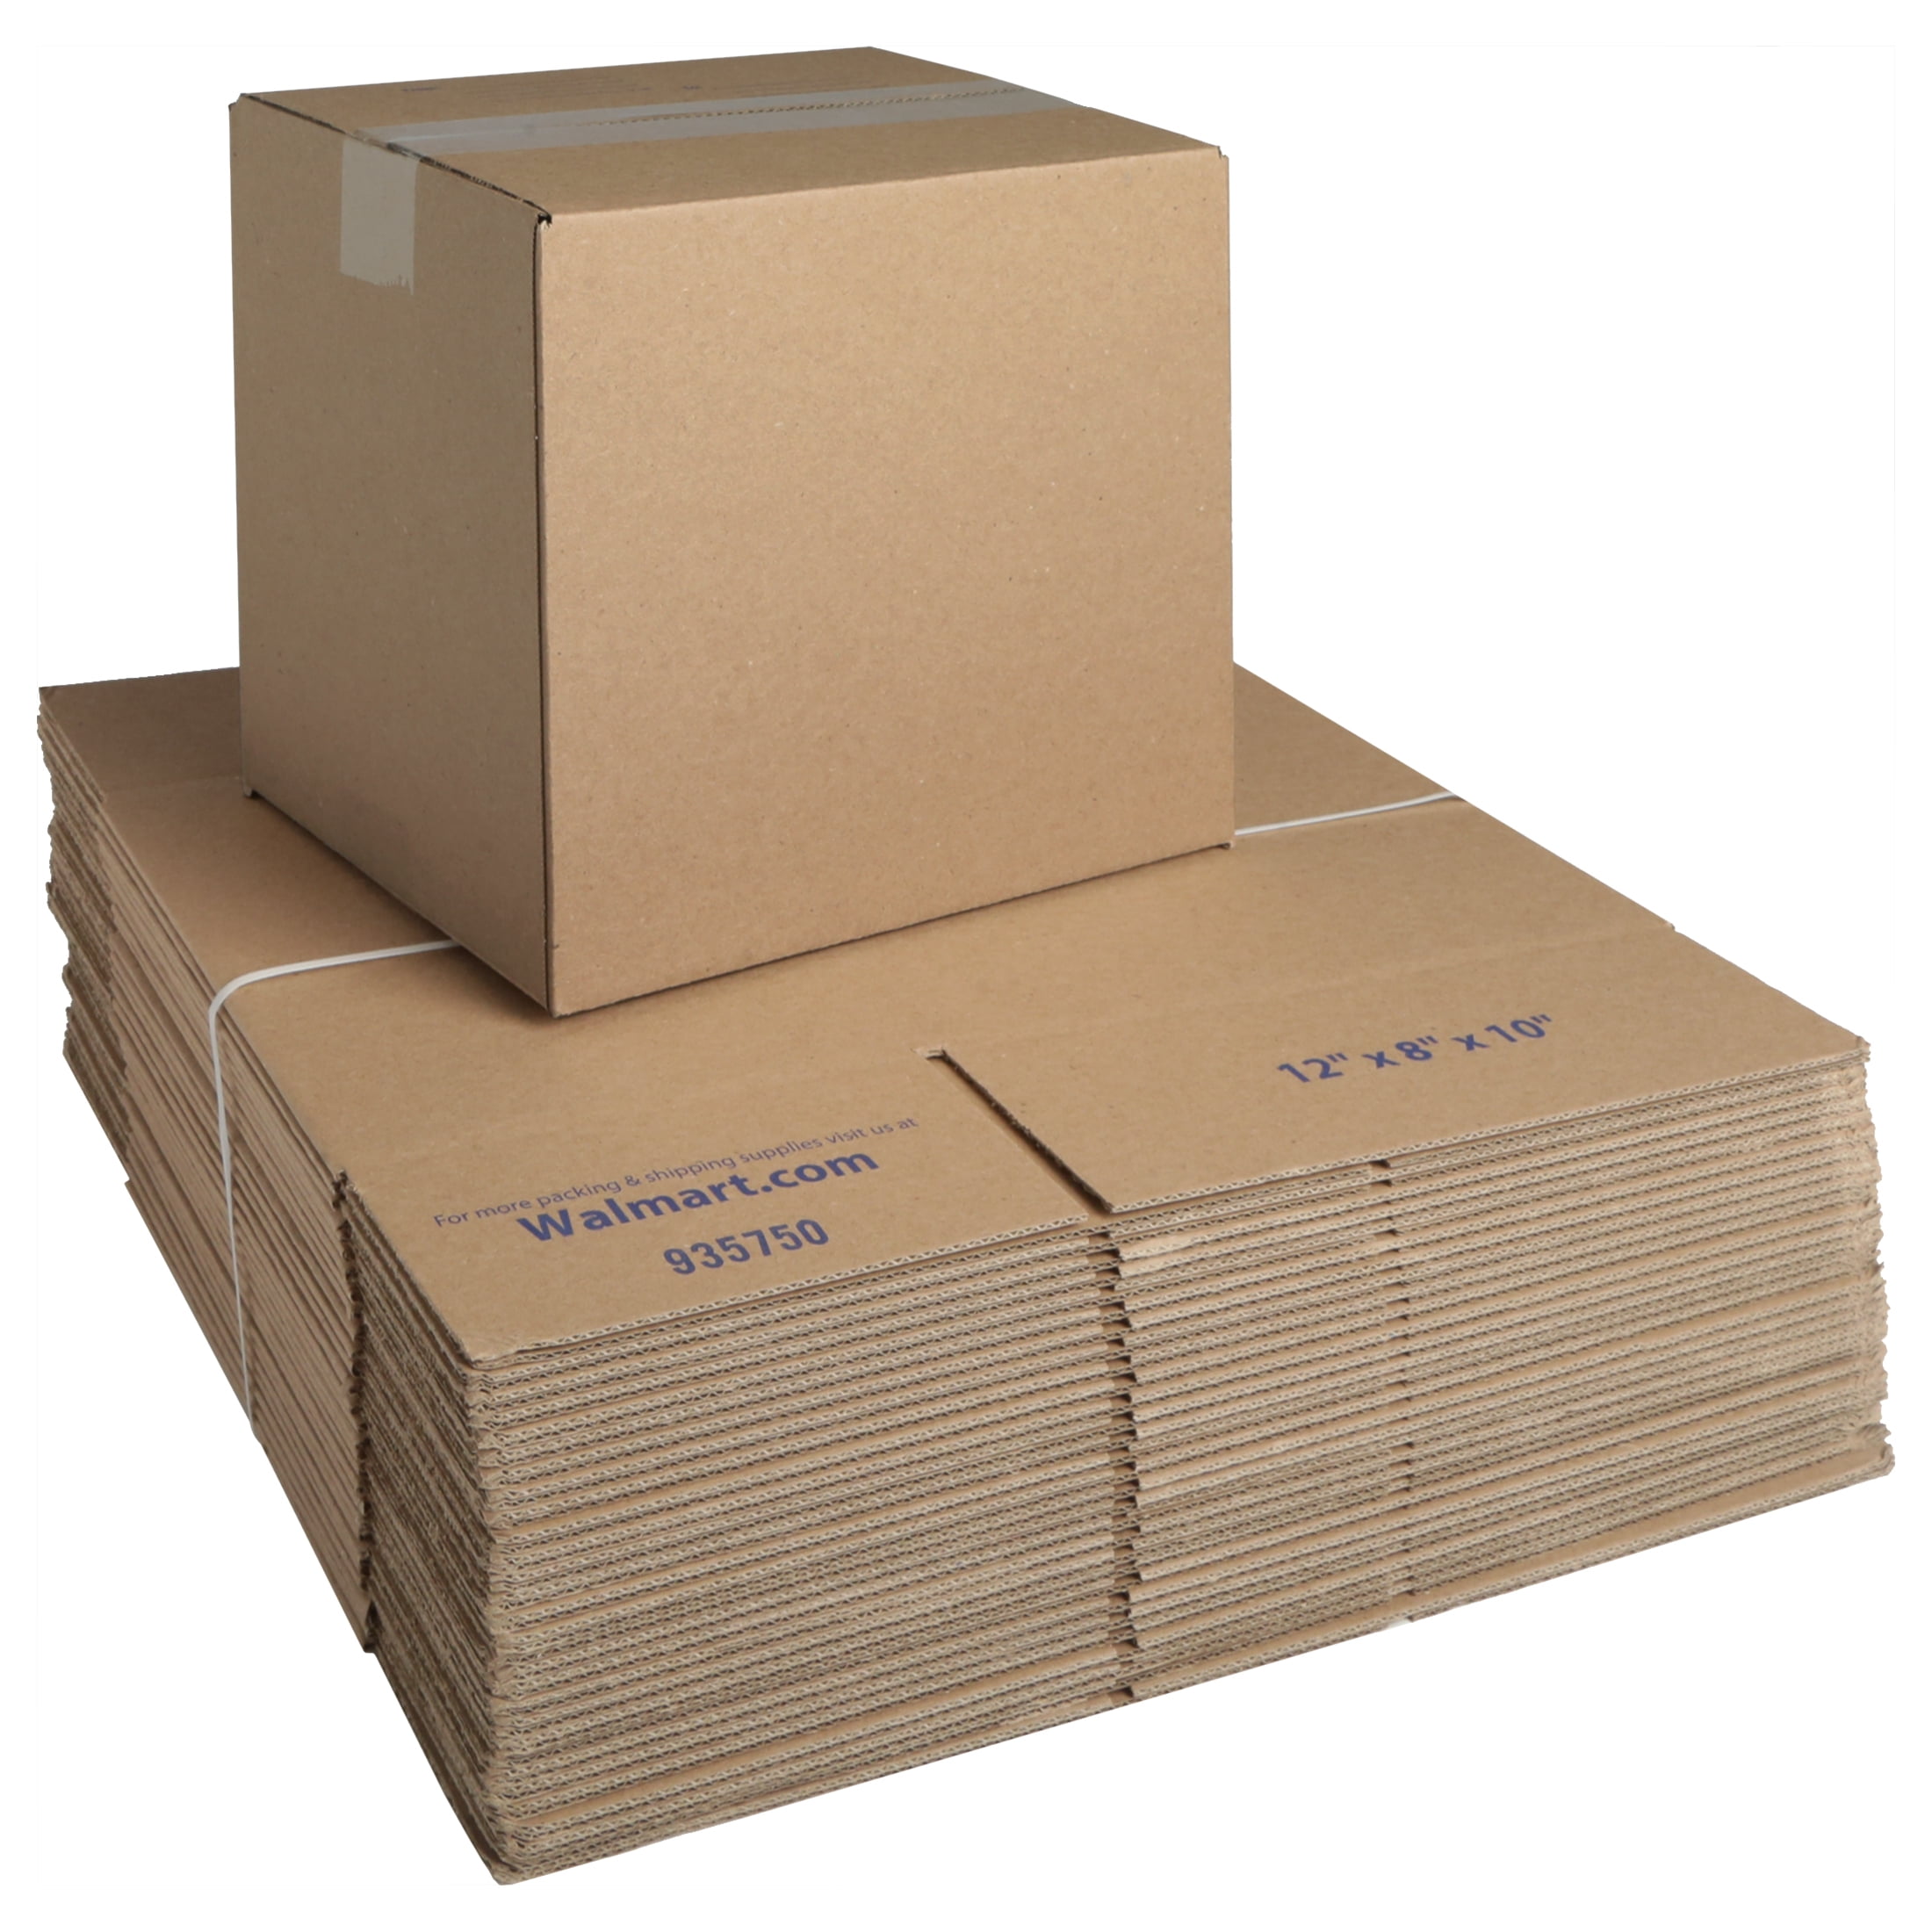 4 x 4 x 4 Inches 50 Count The Packaging Wholesalers Shipping Boxes Brown